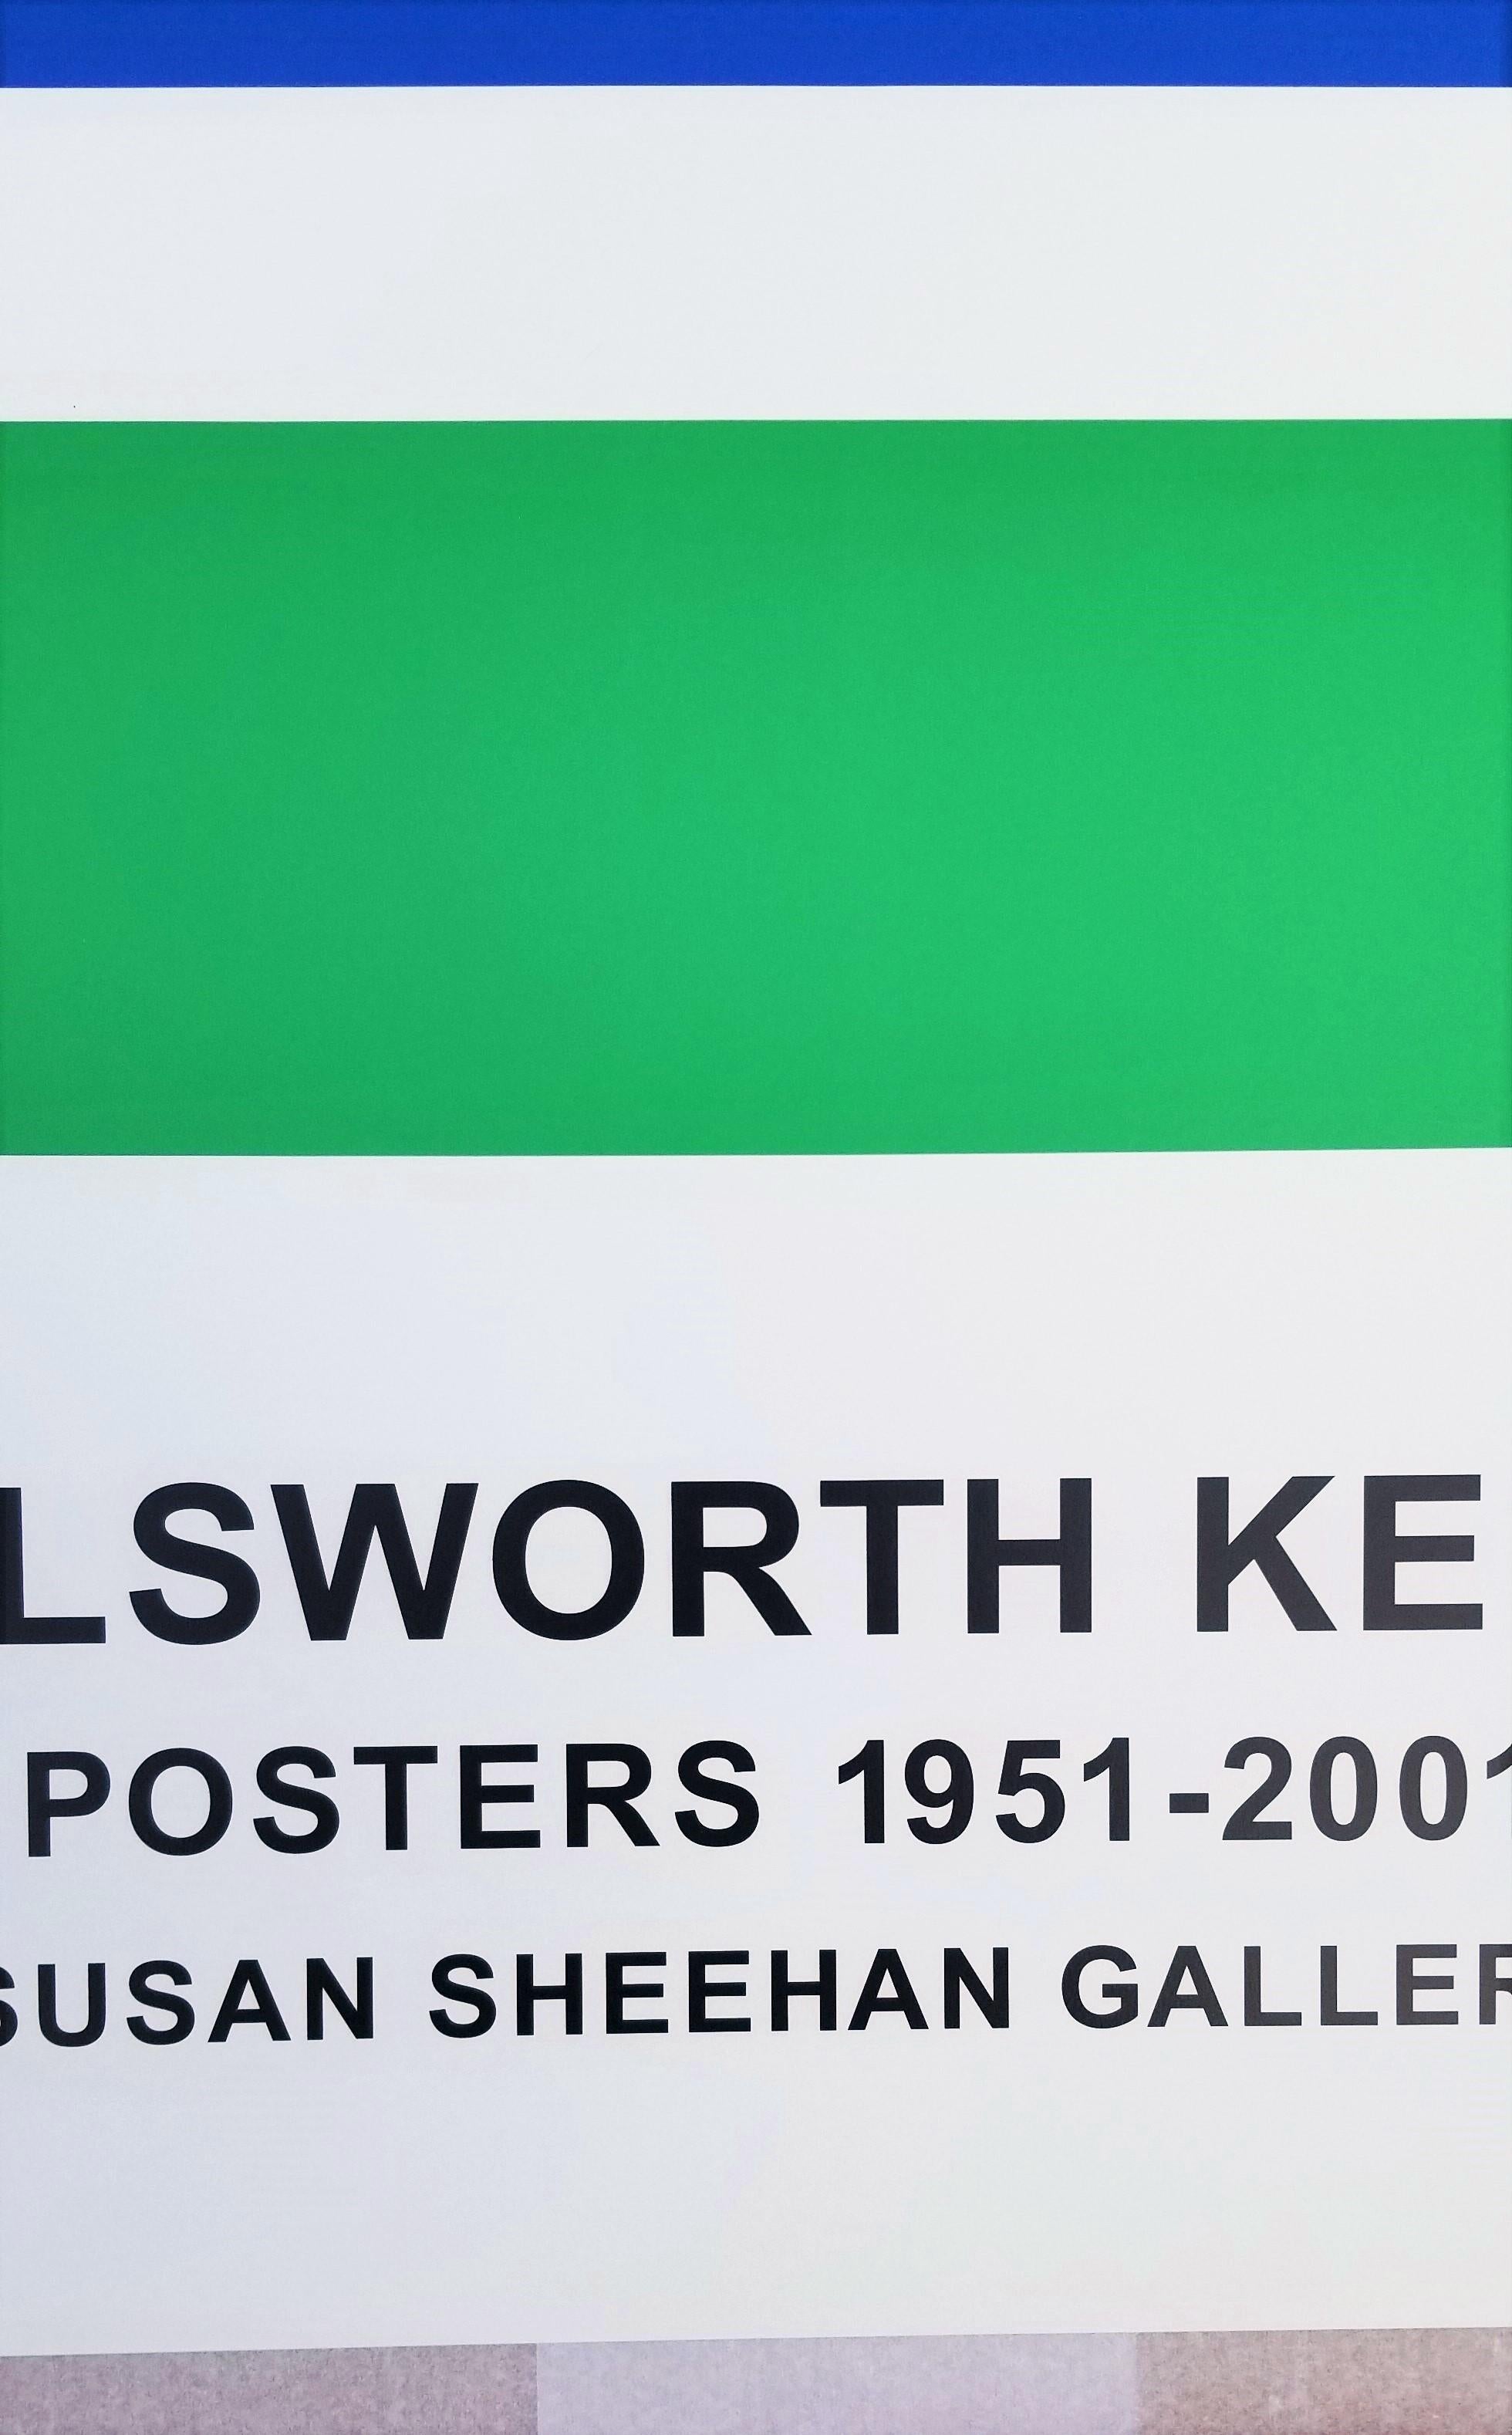 Susan Sheehan Gallery (Ellsworth Kelly Posters 1951-2001) Poster (Signed) Color For Sale 8